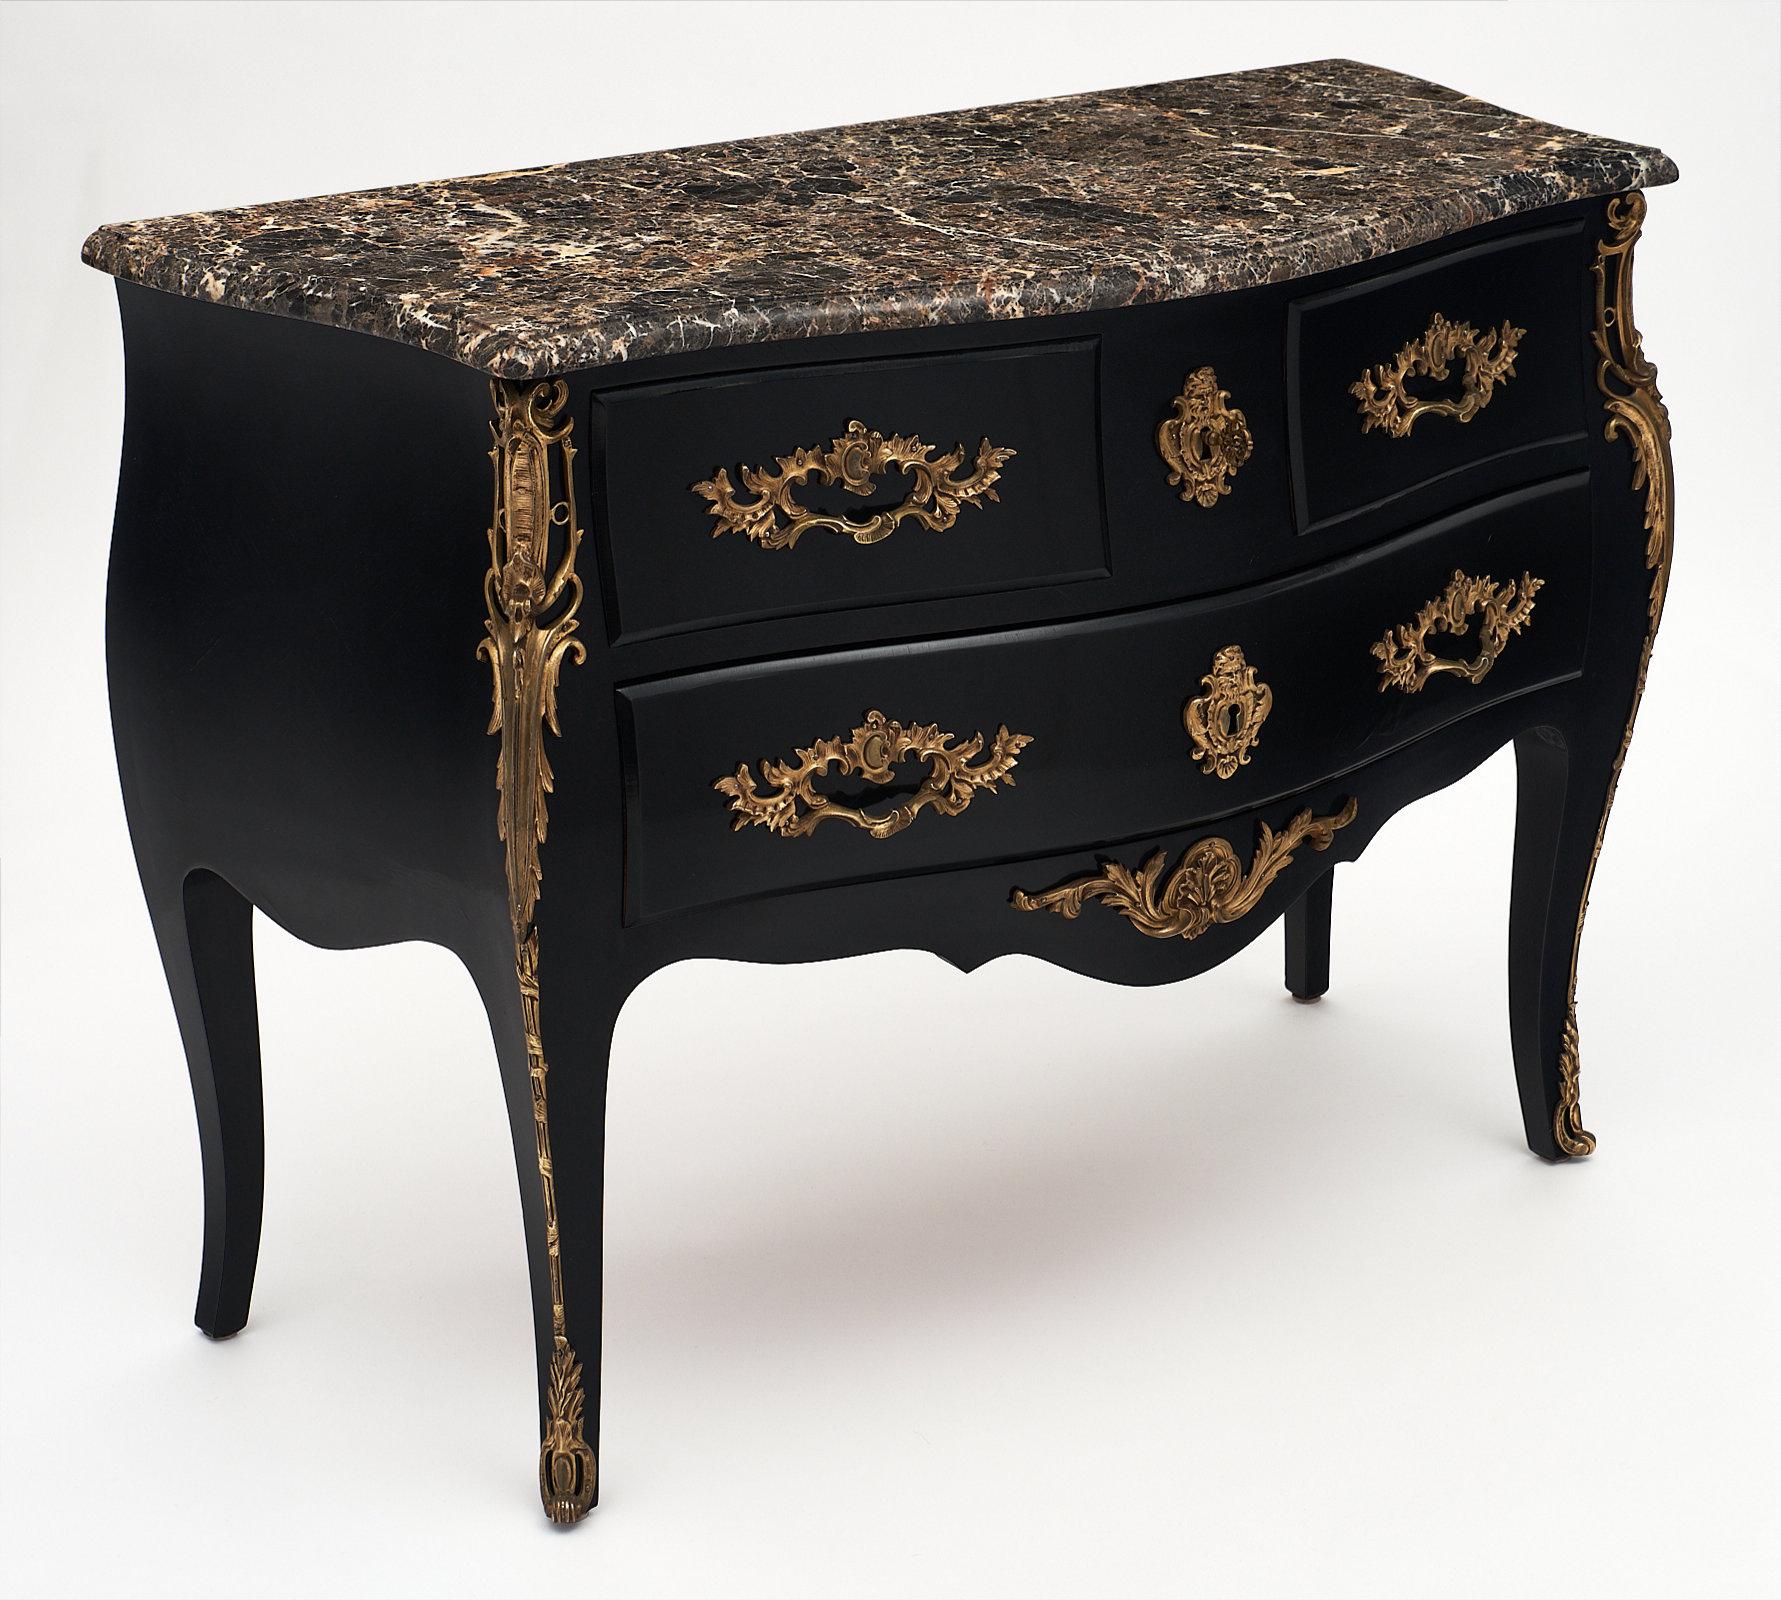 Superb French antique Louis XV “commode” chest of drawers featuring a Brêche royal marble top. This piece is made of ebonized rosewood finished with a lustrous French polish that contrasts beautifully with the bronze mounts. It is adorned with very